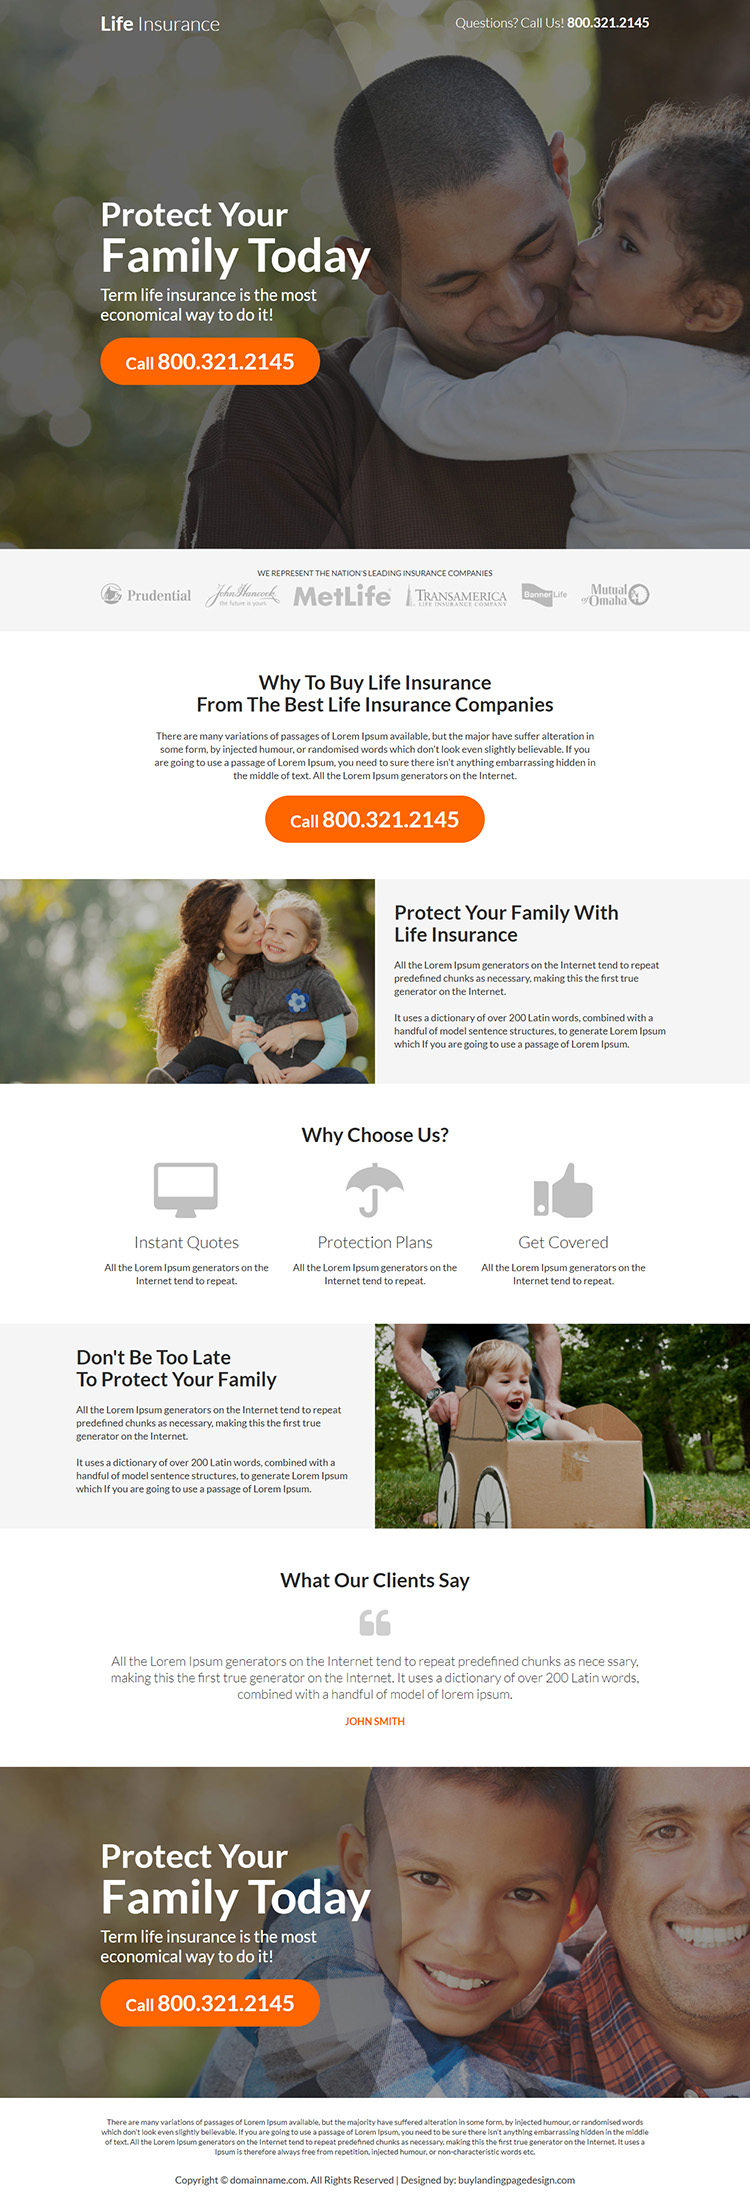 life insurance company click to call landing page design